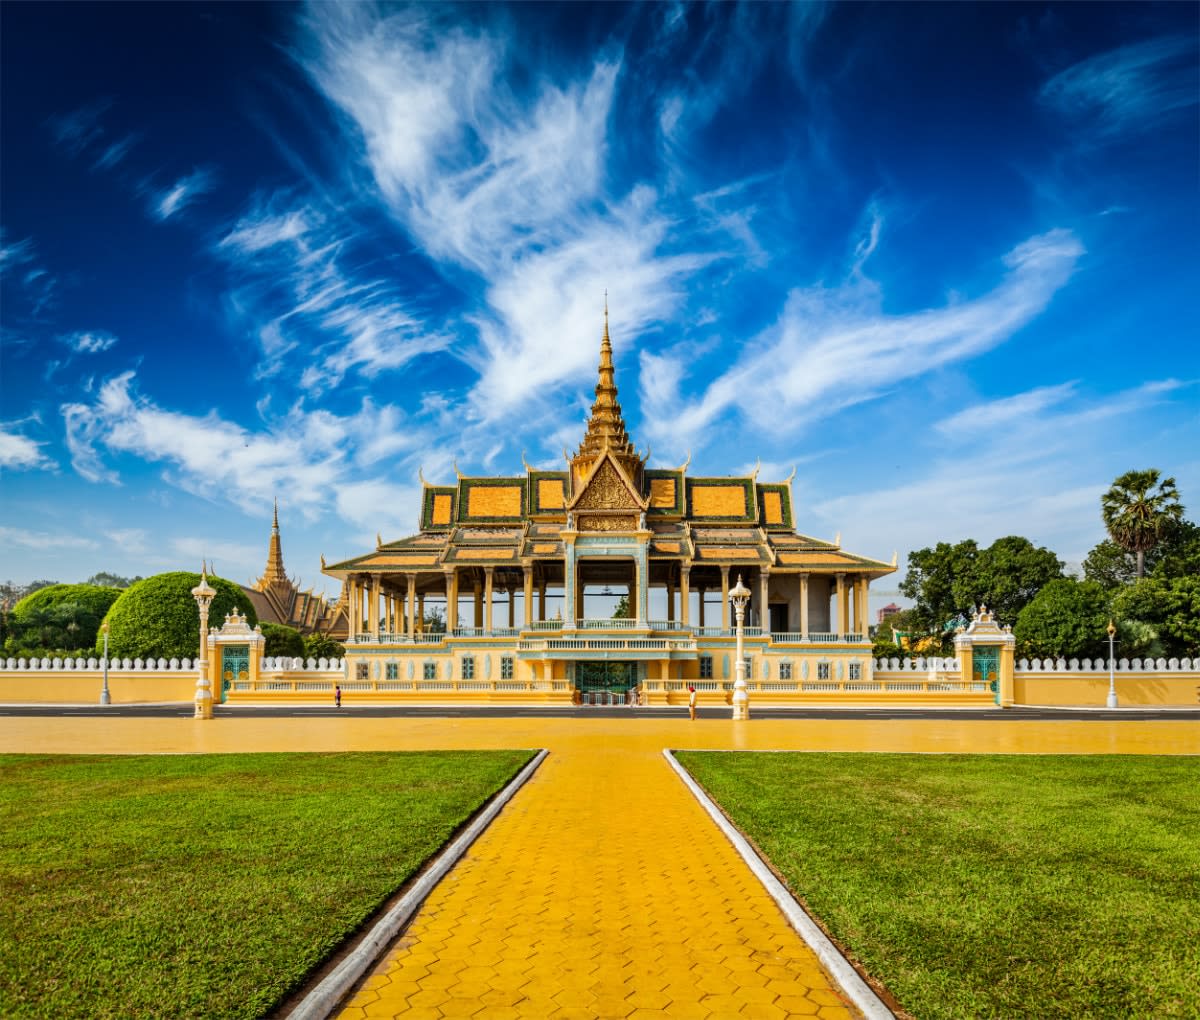 Phnom penh travel guide: what you need to know before you go